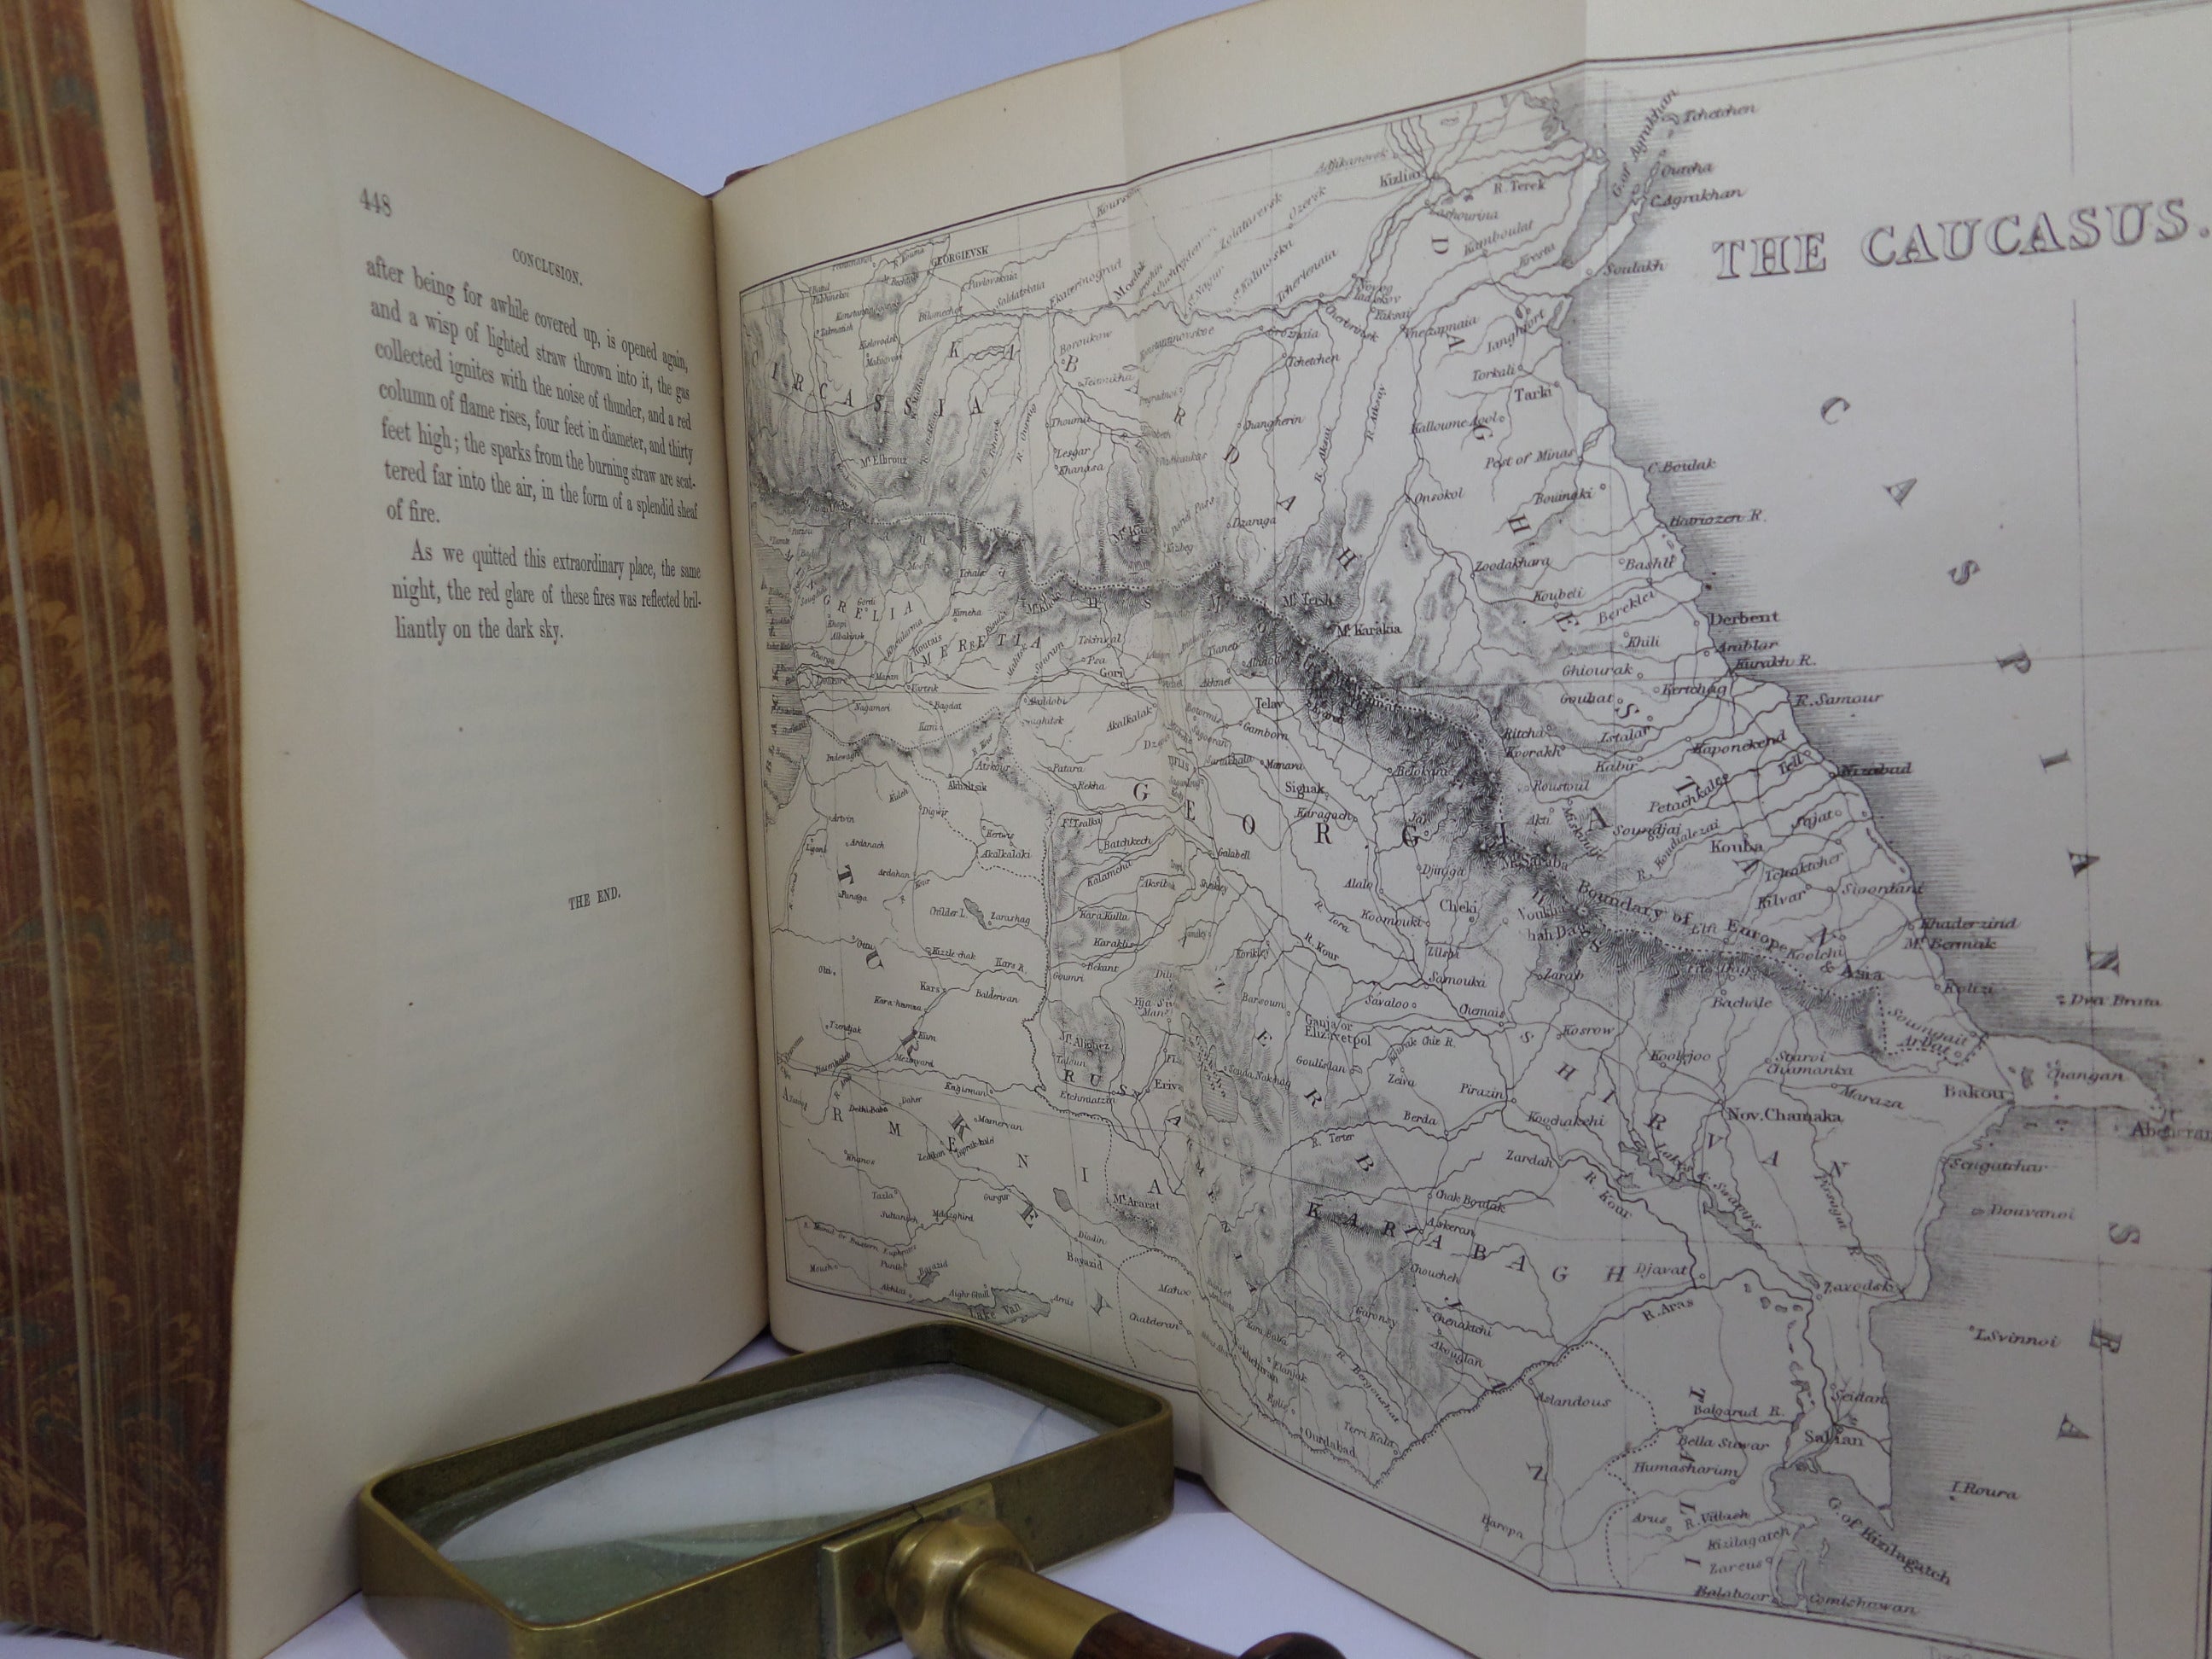 TRANSCAUCASIA BY BARON VON HAXTHAUSEN 1854 FIRST EDITION, LEATHER-BOUND Sketches of Nations & Races Between Black & Caspian Sea